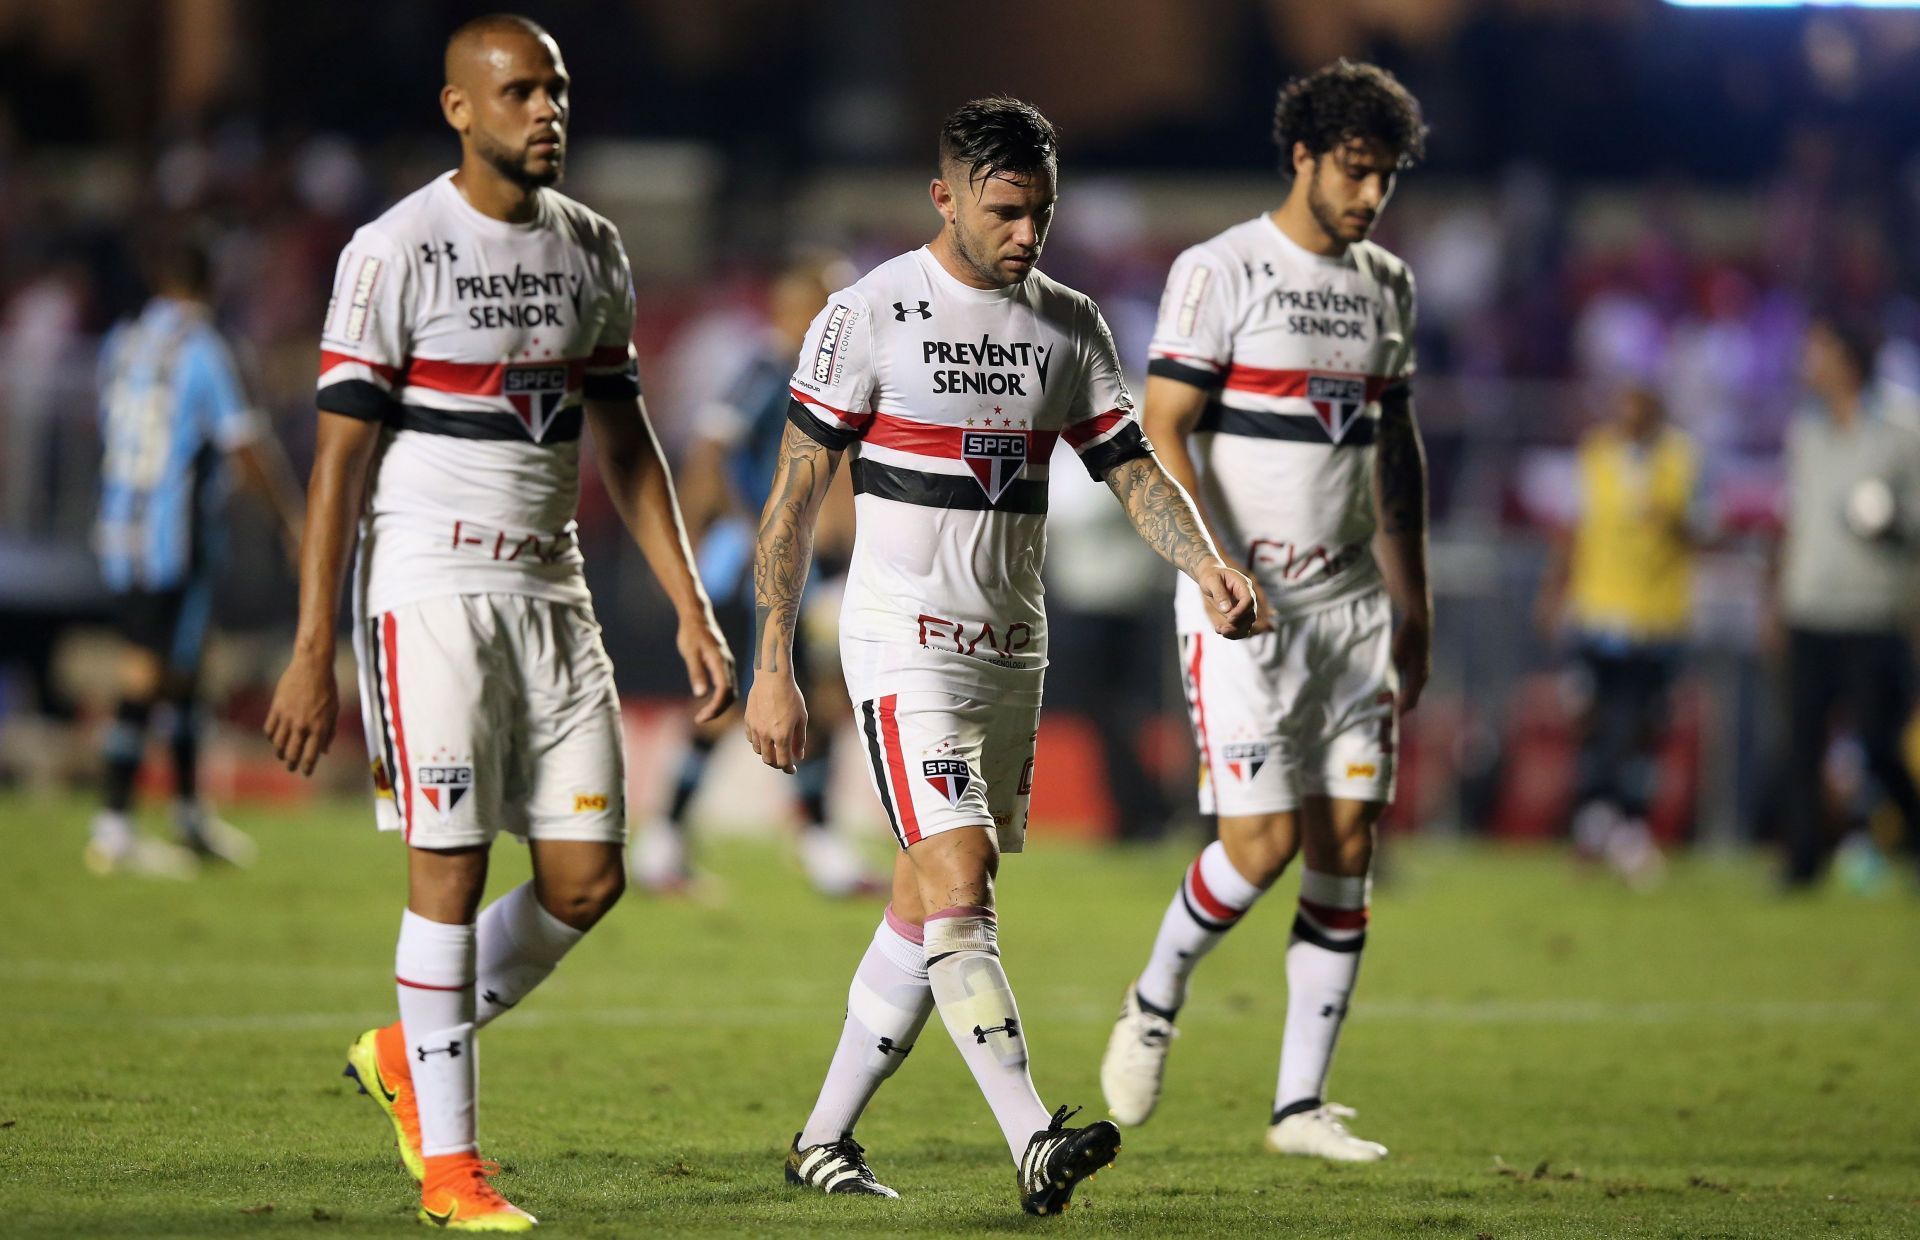 Sao Paulo will take on Atletico Goianiense in their upcoming Brazilian Serie A fixture on Sunday